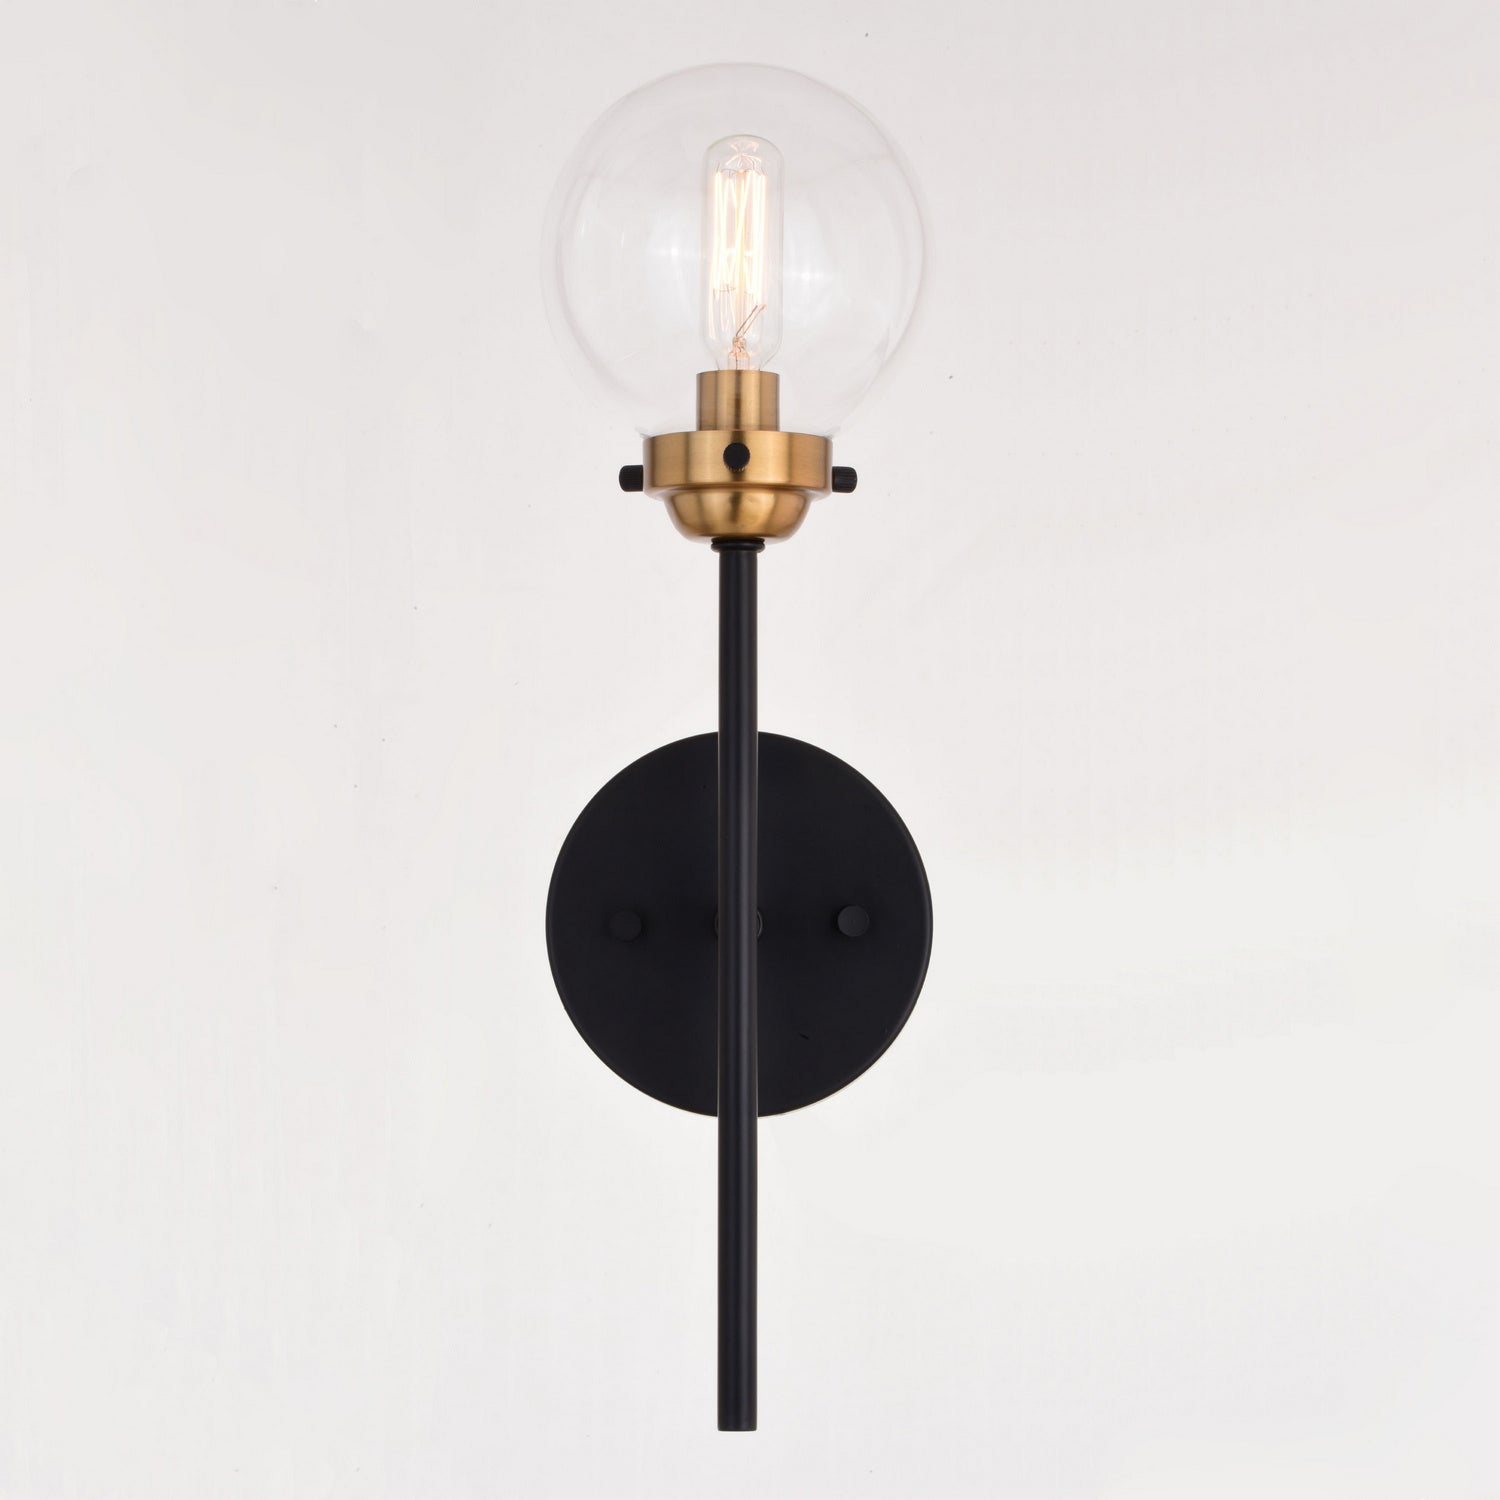 Vaxcel Orbit W0395 Wall Light - Muted Brass and Oil Rubbed Bronze